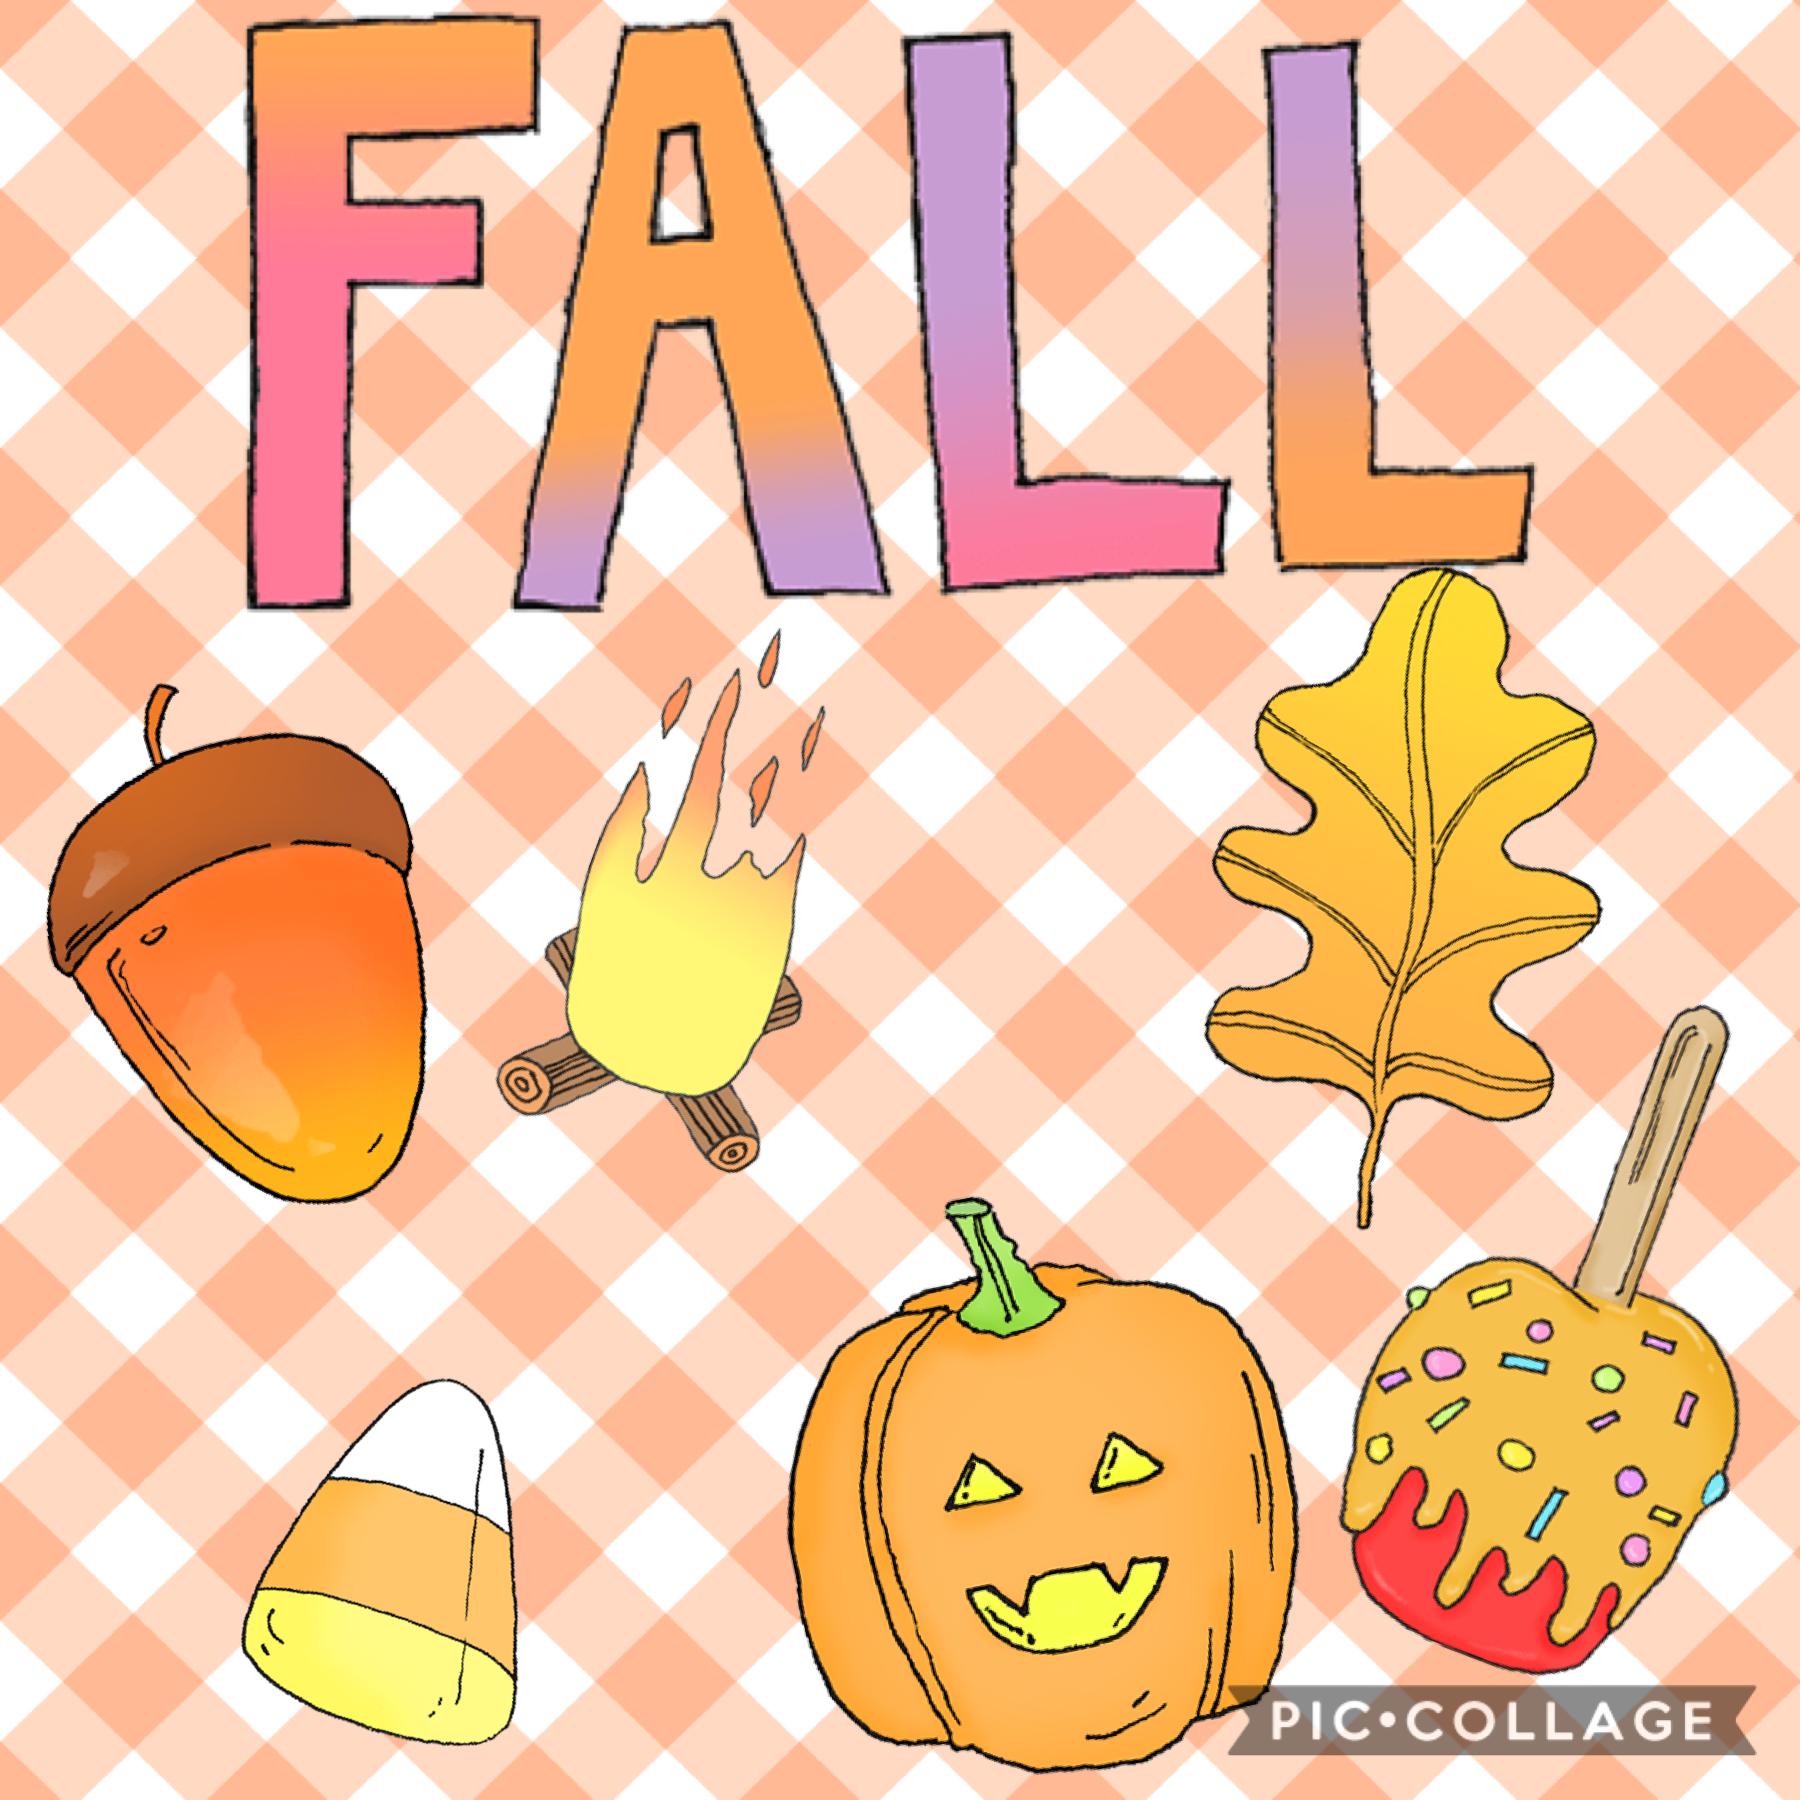 Tap here🎃
Hi I am so happy it is fall and my friends and I are going to help me be in front of the class tomorrow so exited and does anyone smell pumpkin pie?